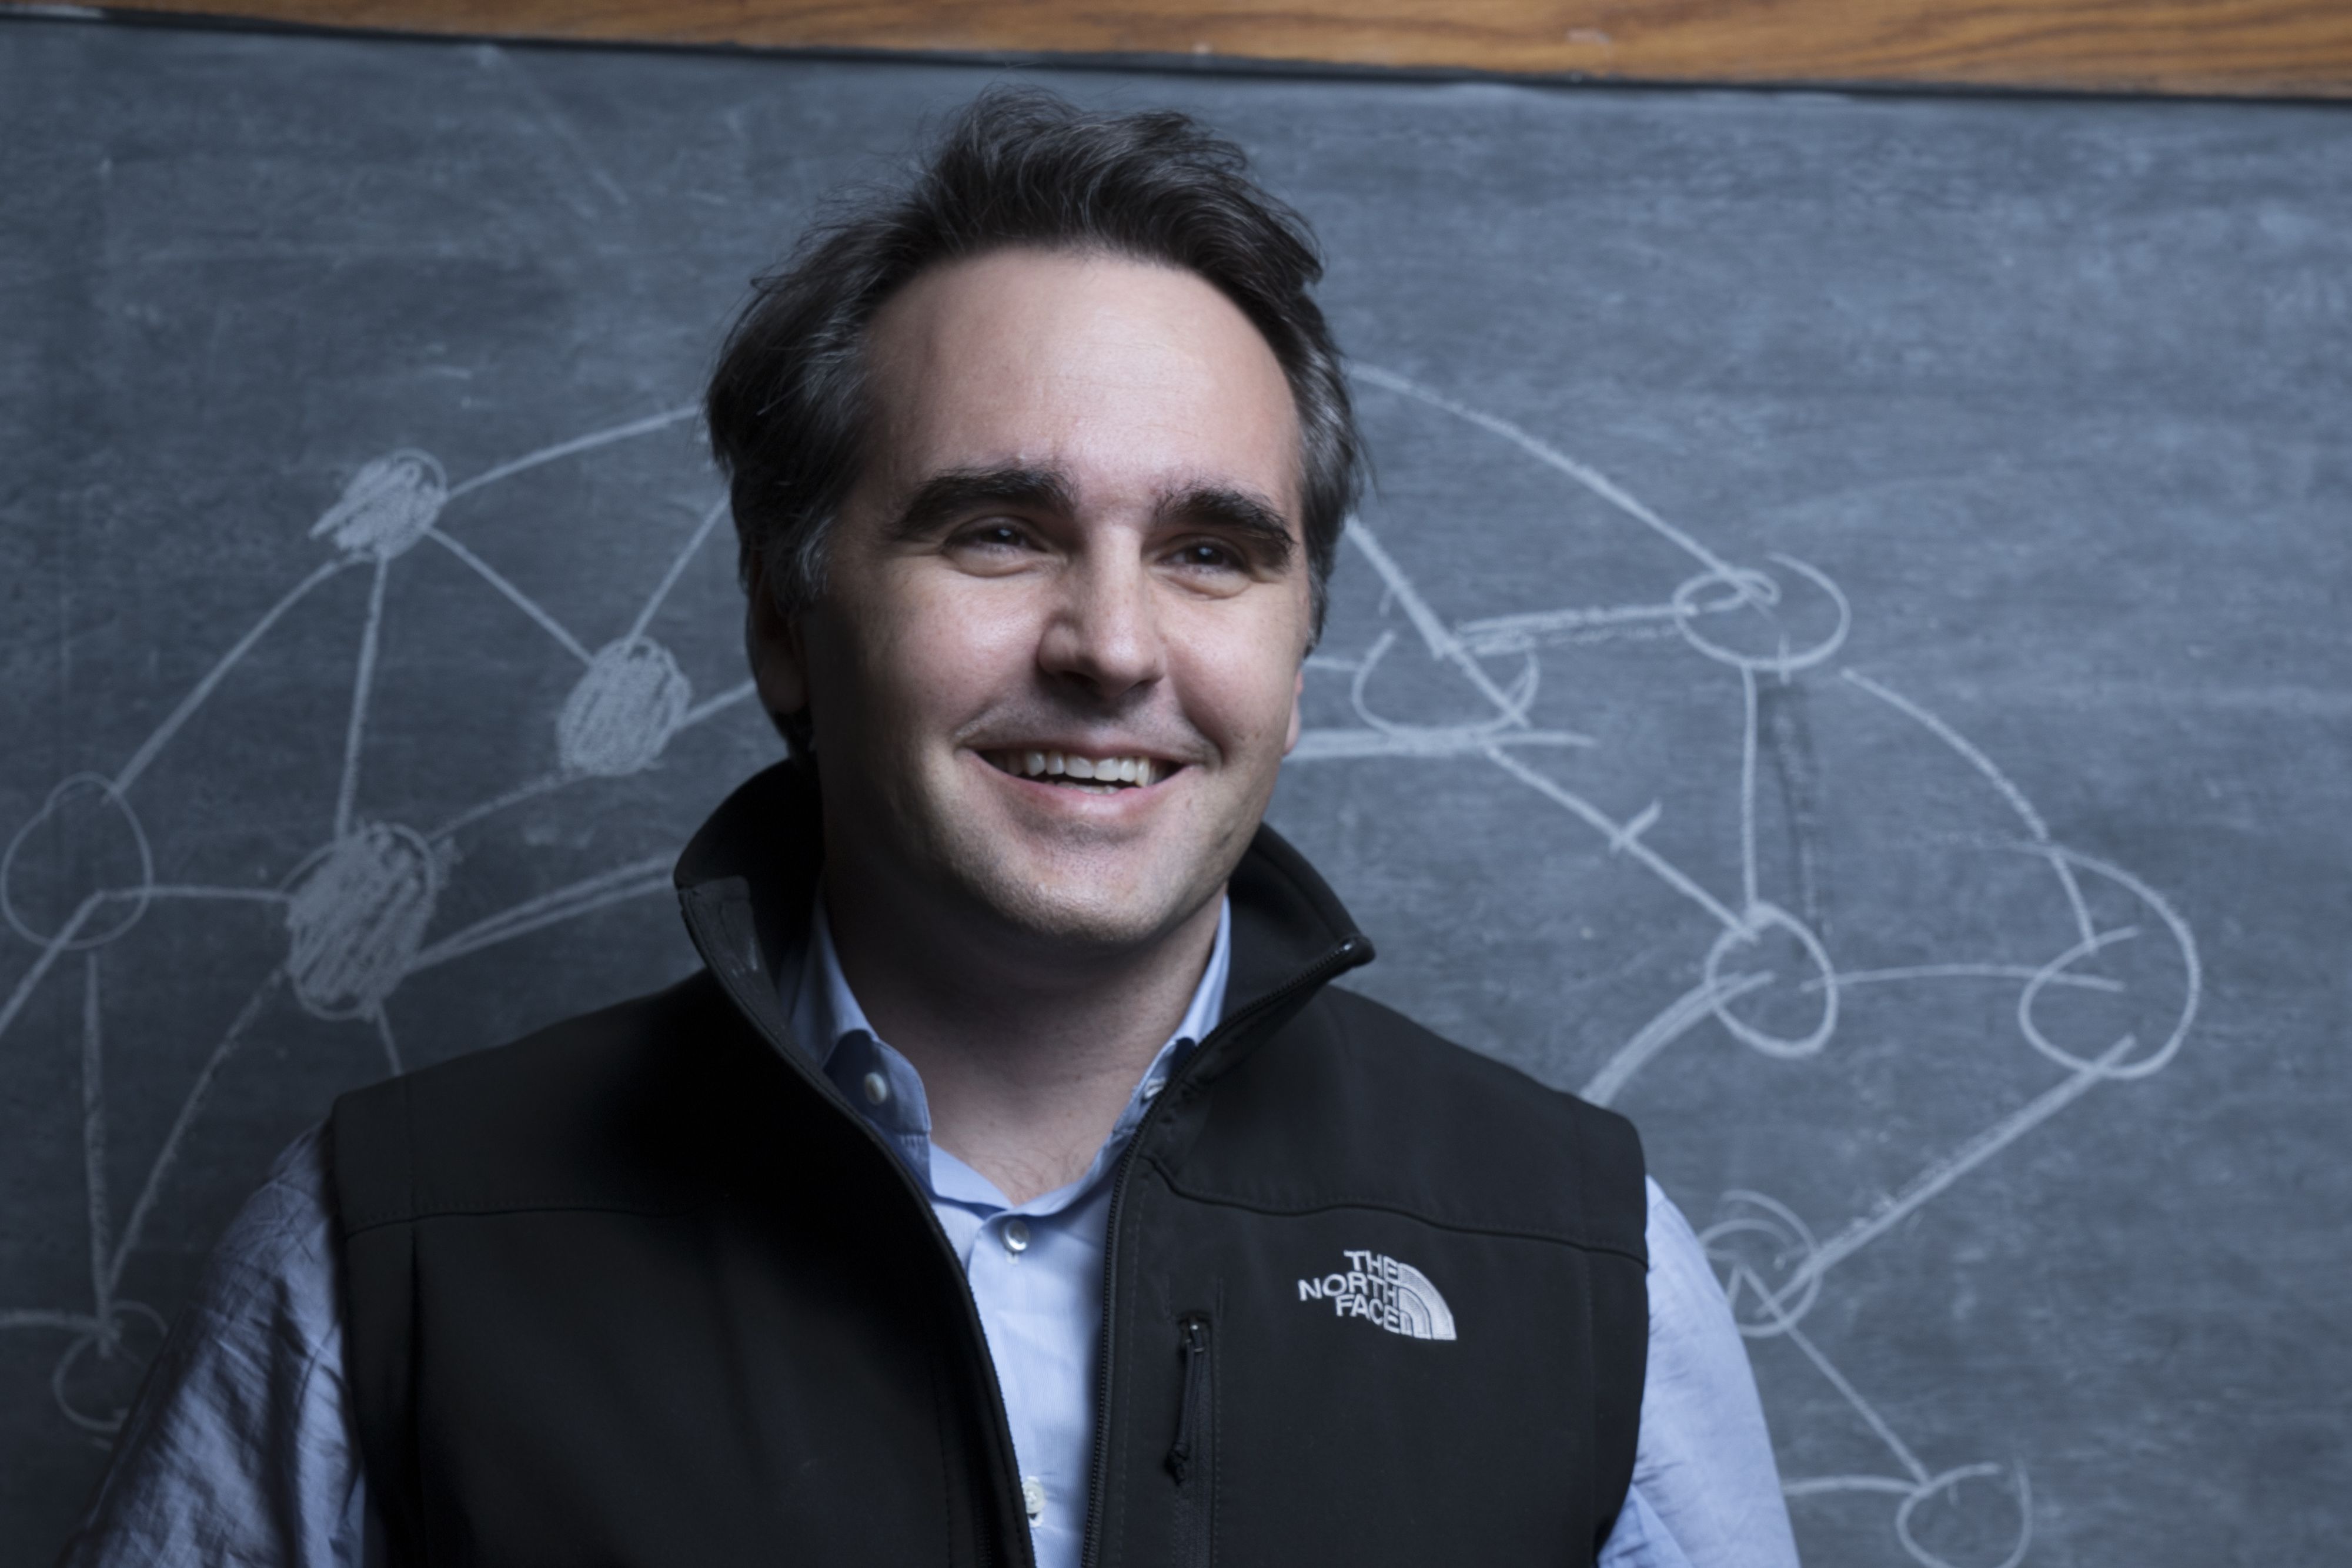 A smiling person in a blue button down shirt with a black "The North Face" vest over it standing in front of a chalkboard with lines and circles, some of which are filled in.